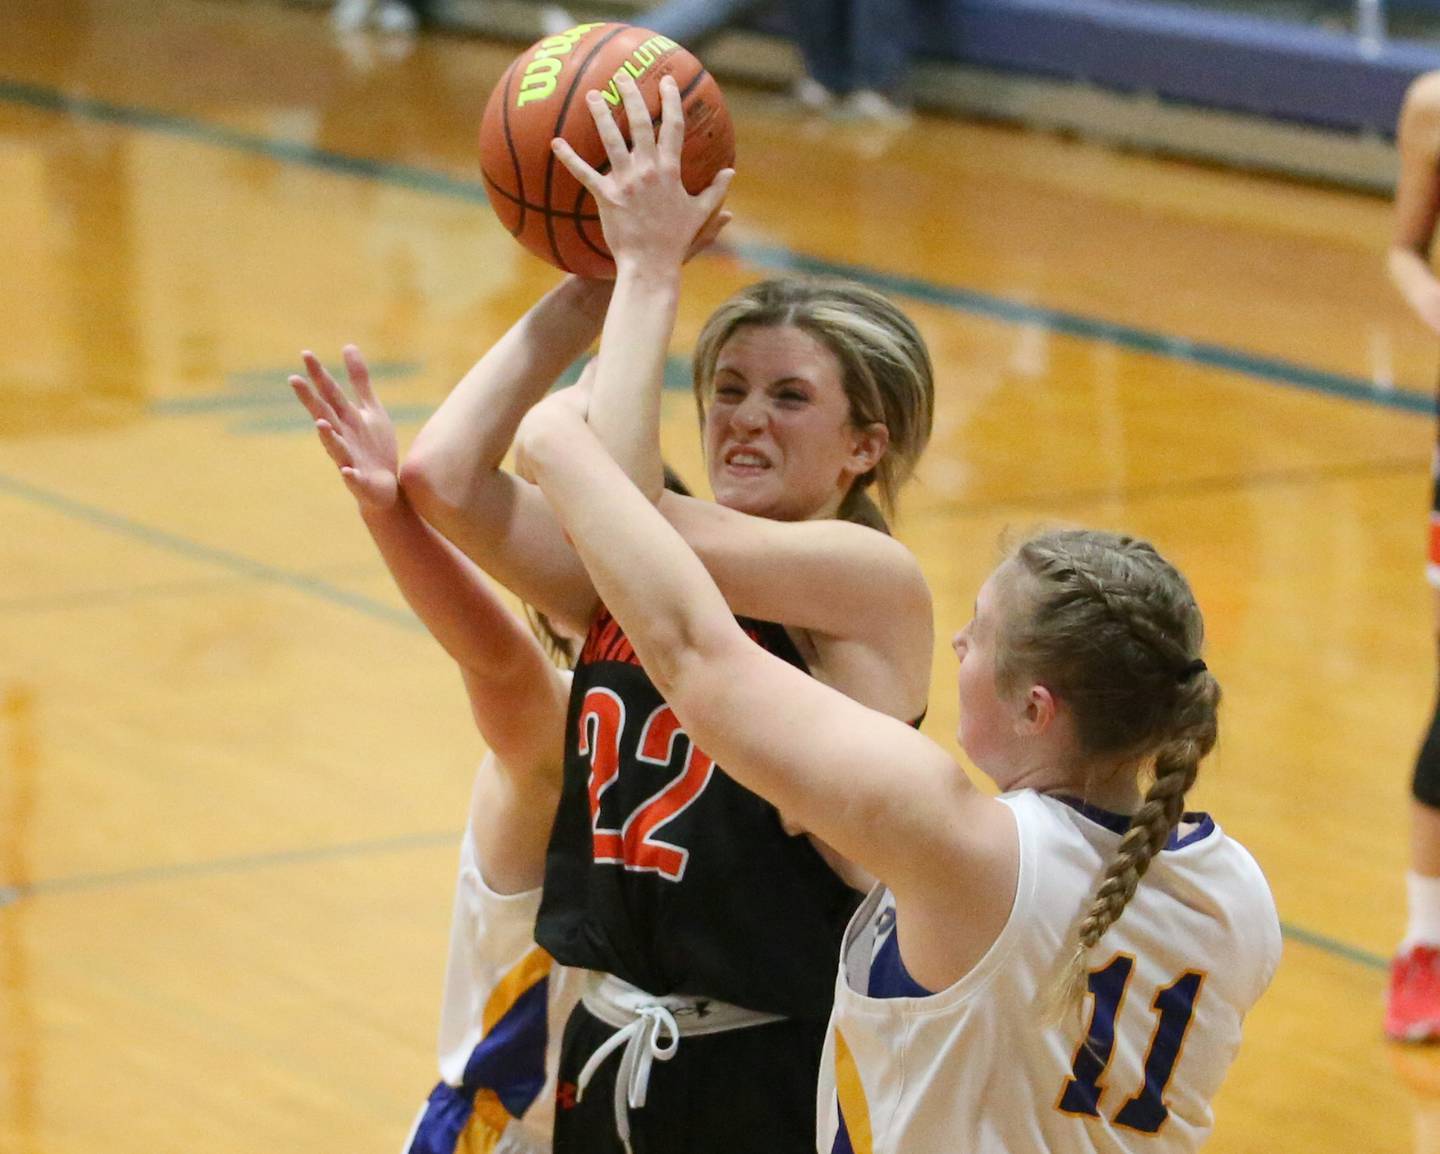 Sandwich's Kaylin Herren (22) fights her way into the lane where she is met by Somonauk's Morgan Potter (11) in the Tim Humes Breakout Tournament on Friday, Nov. 18, 2022 in Somonauk.